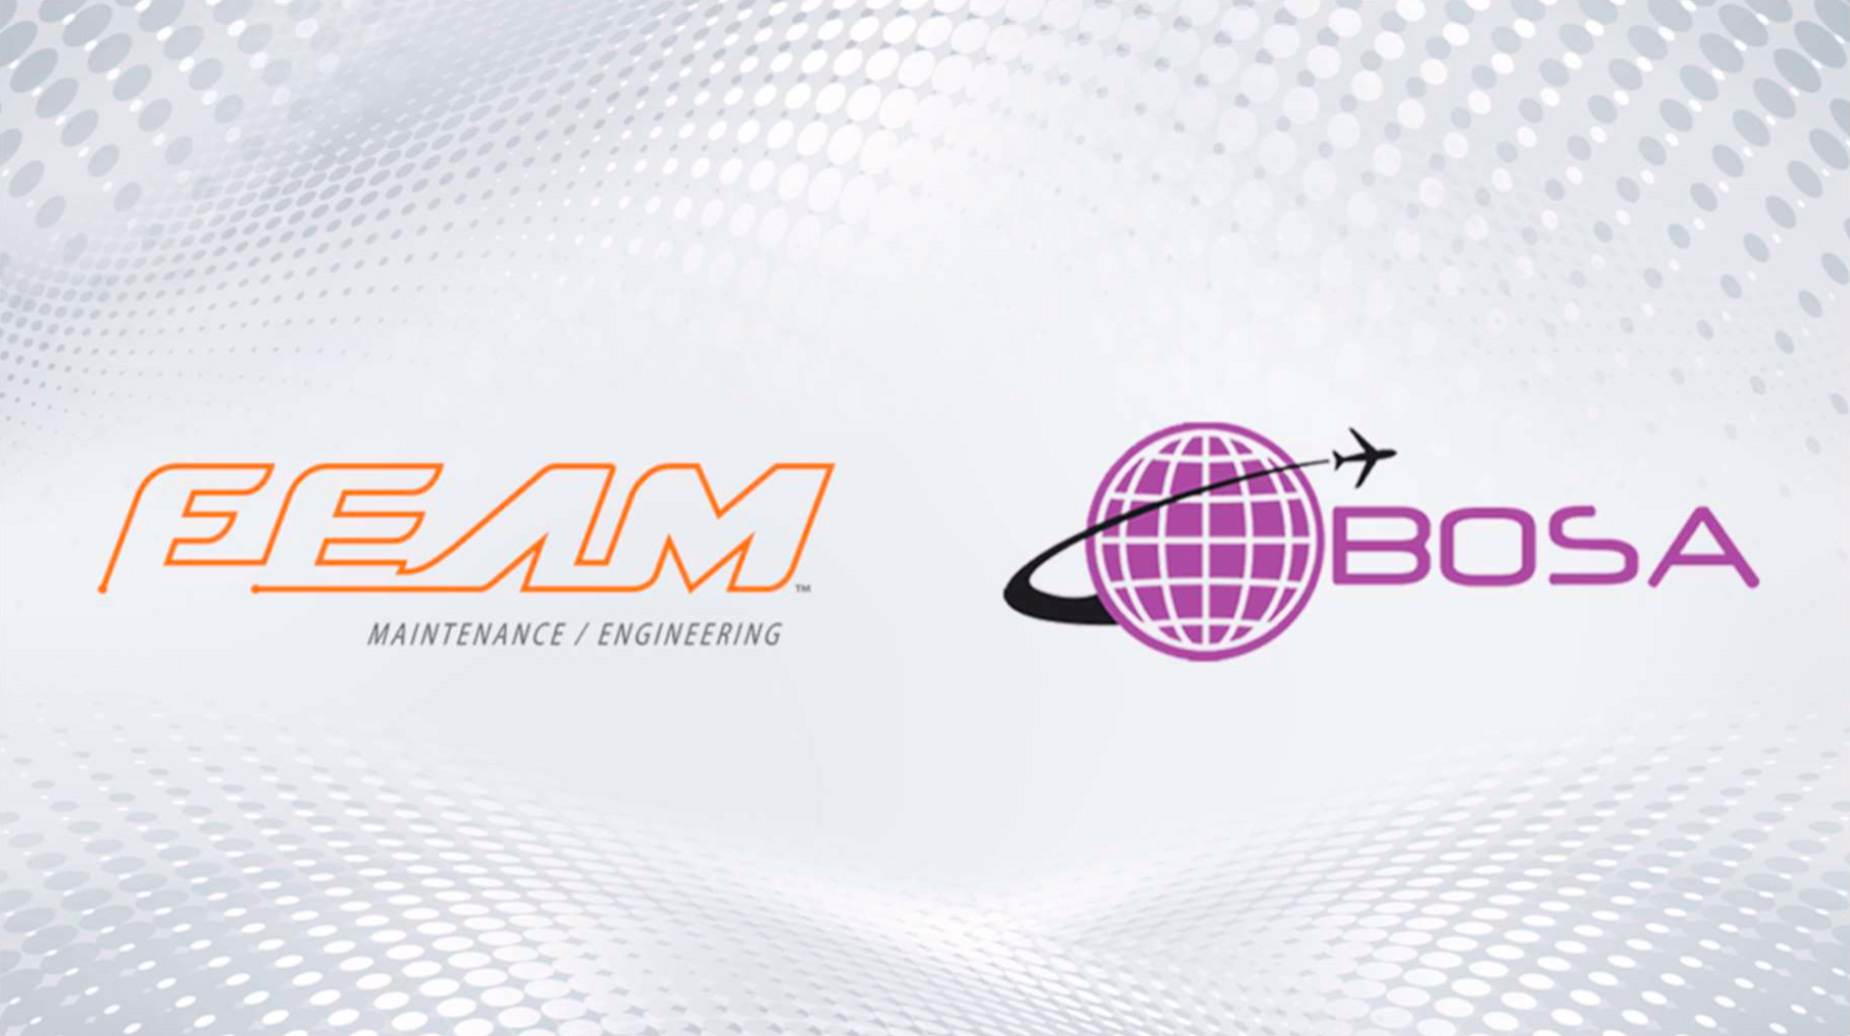 Acquisition of BOS Aerospace by US based FEAM